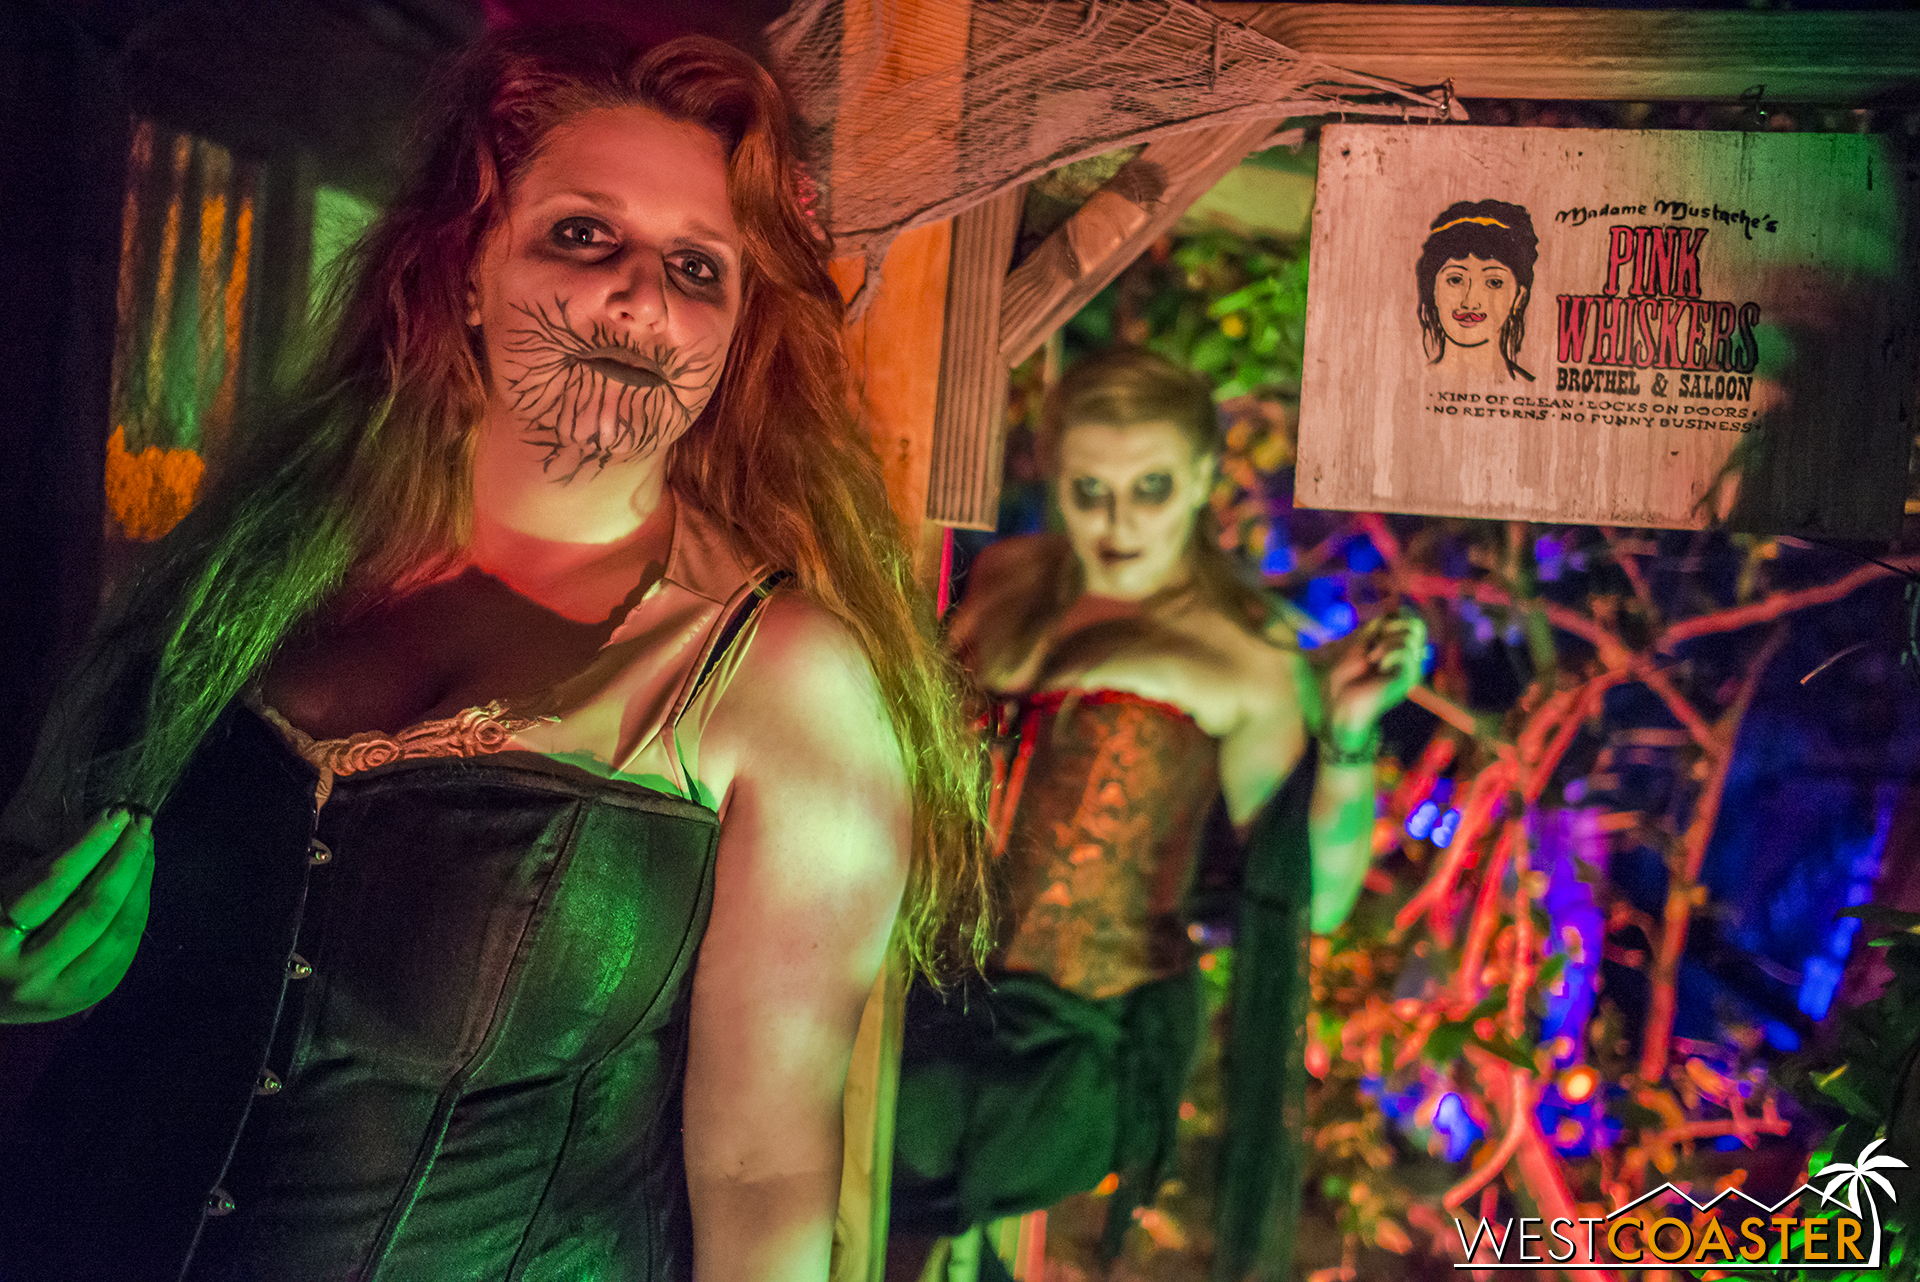  These gals were one of last year's big, entertaining hits, their playful innuendo bringing a slightly inappropriate but still fun element to the haunt. 